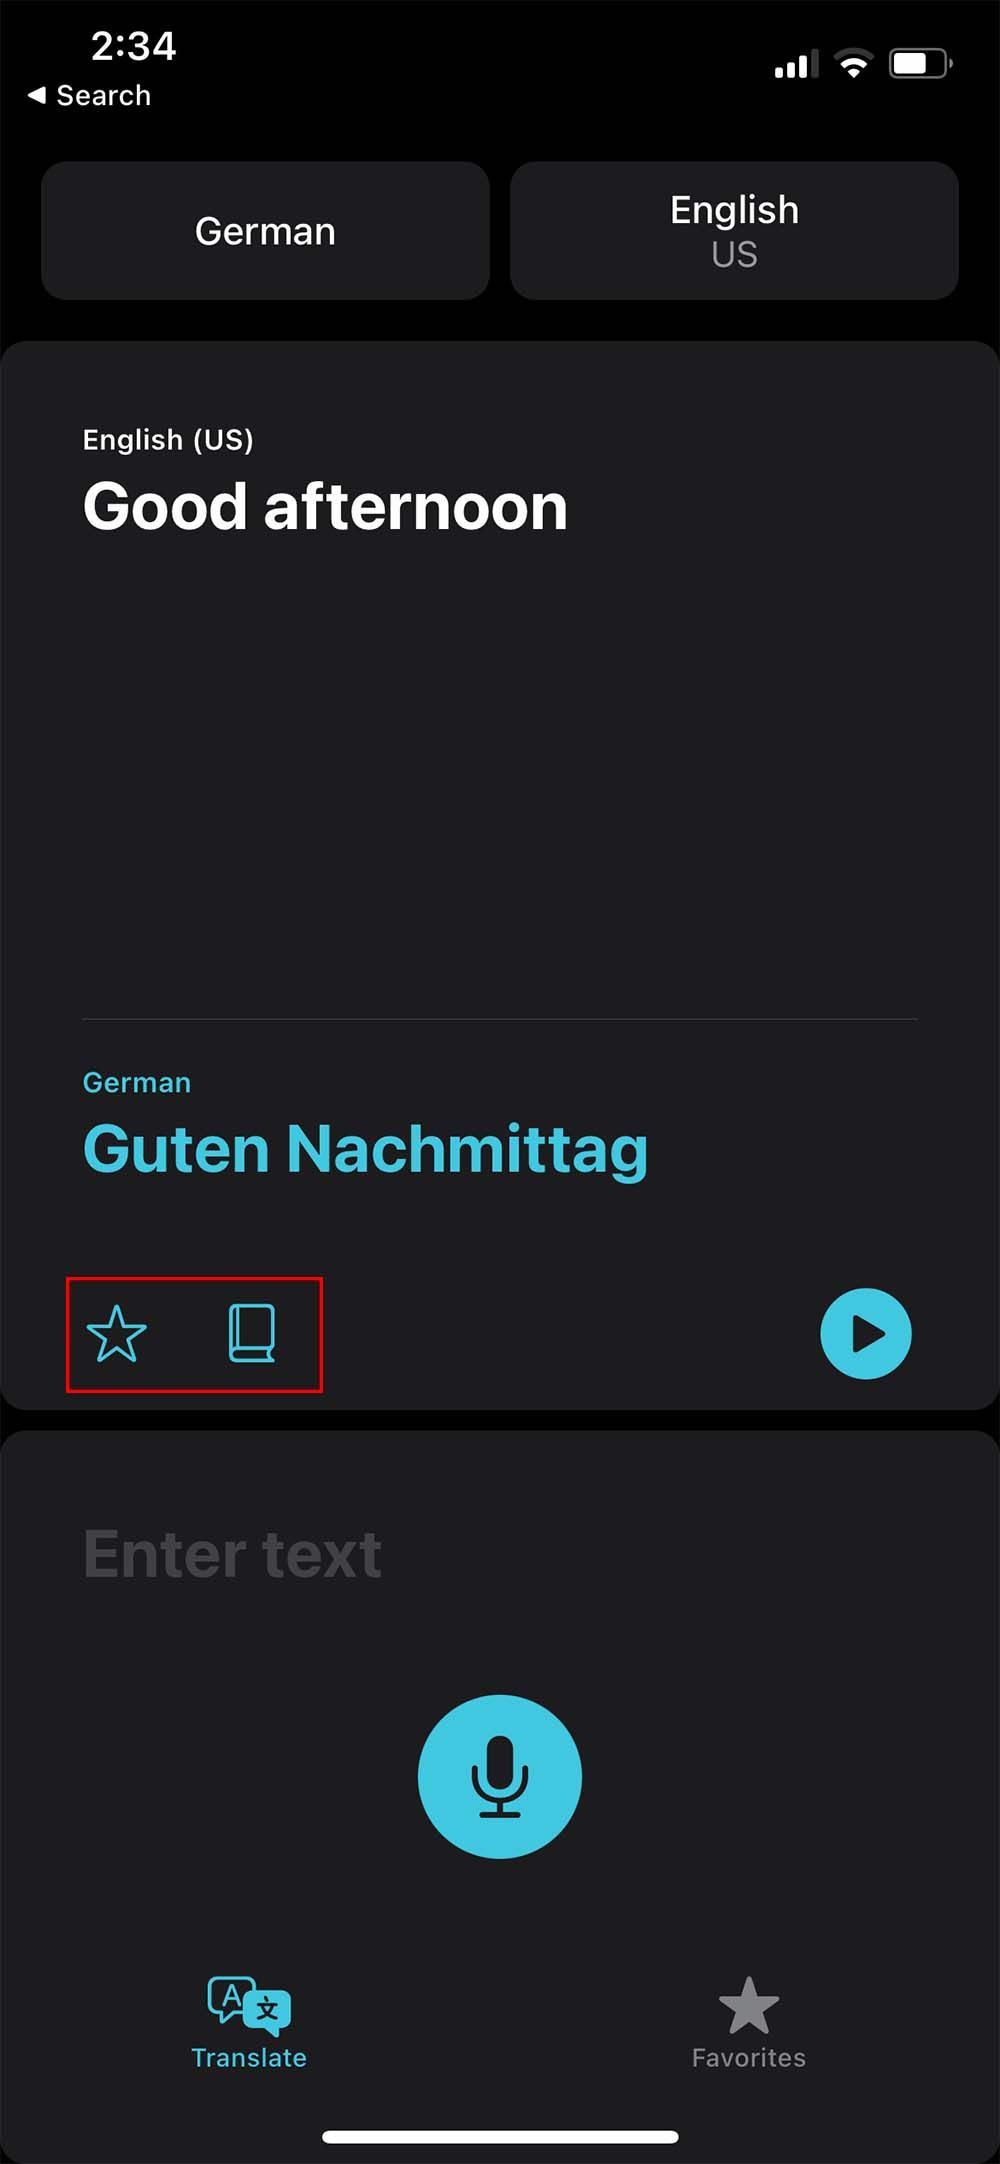 Use the Favorites and Dictionary Function in the Translate app